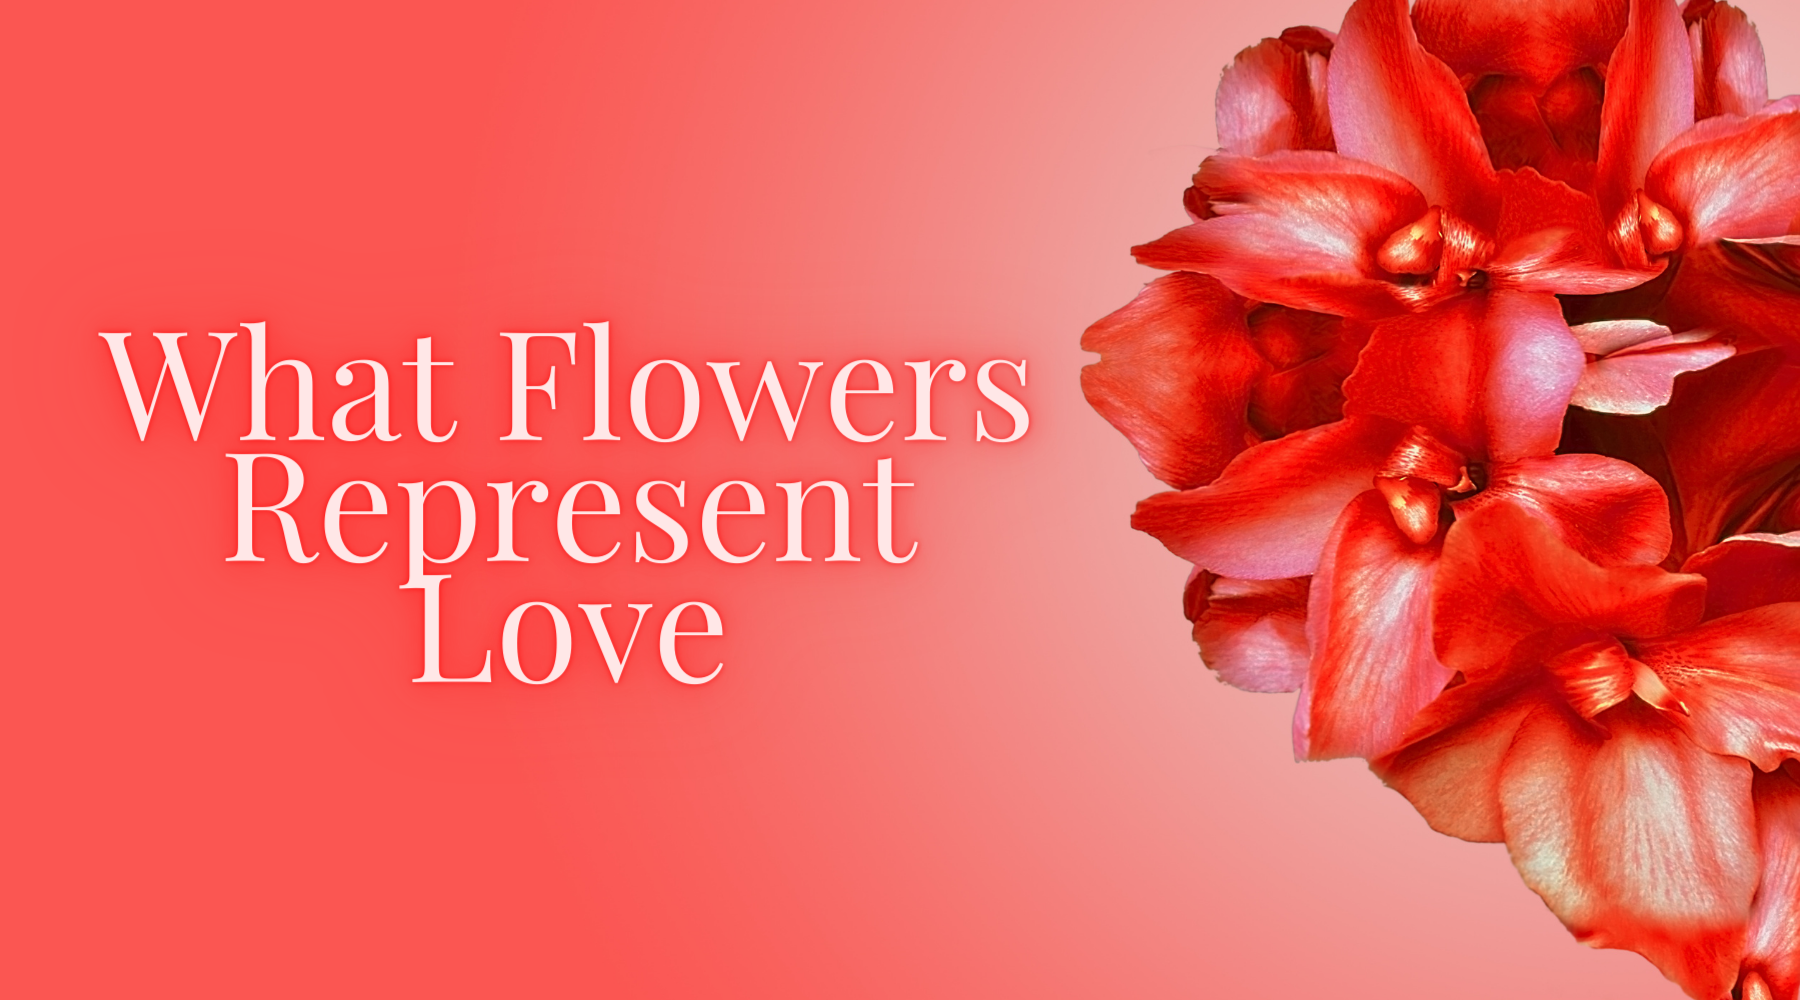 What Flowers Represent Love